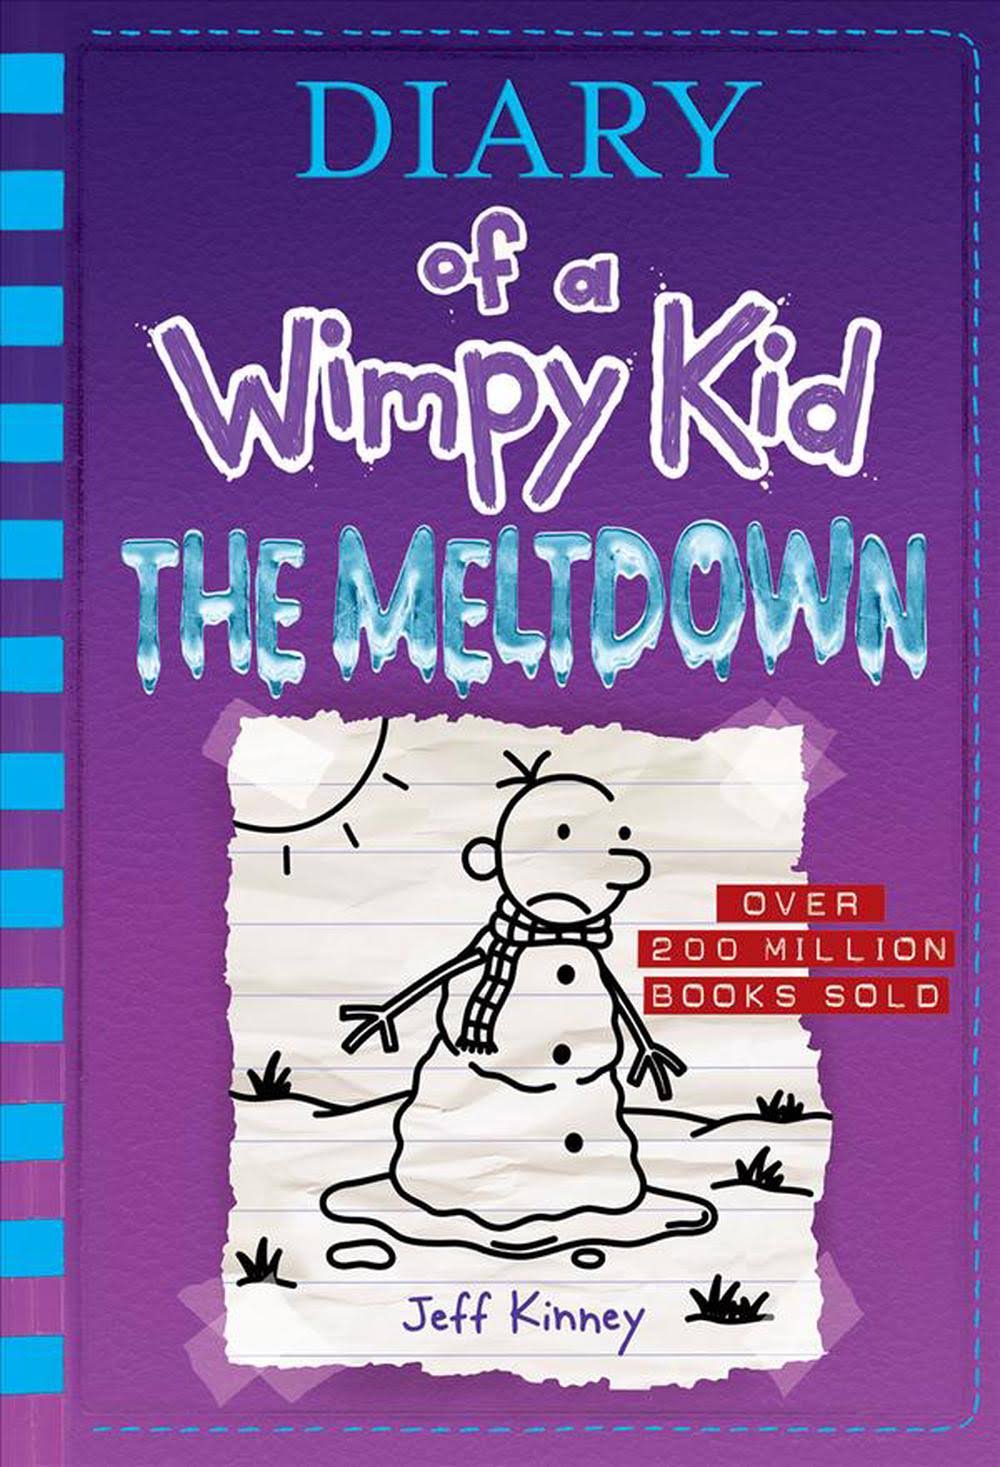 The Meltdown (Diary of a Wimpy Kid Book 13) [Book]